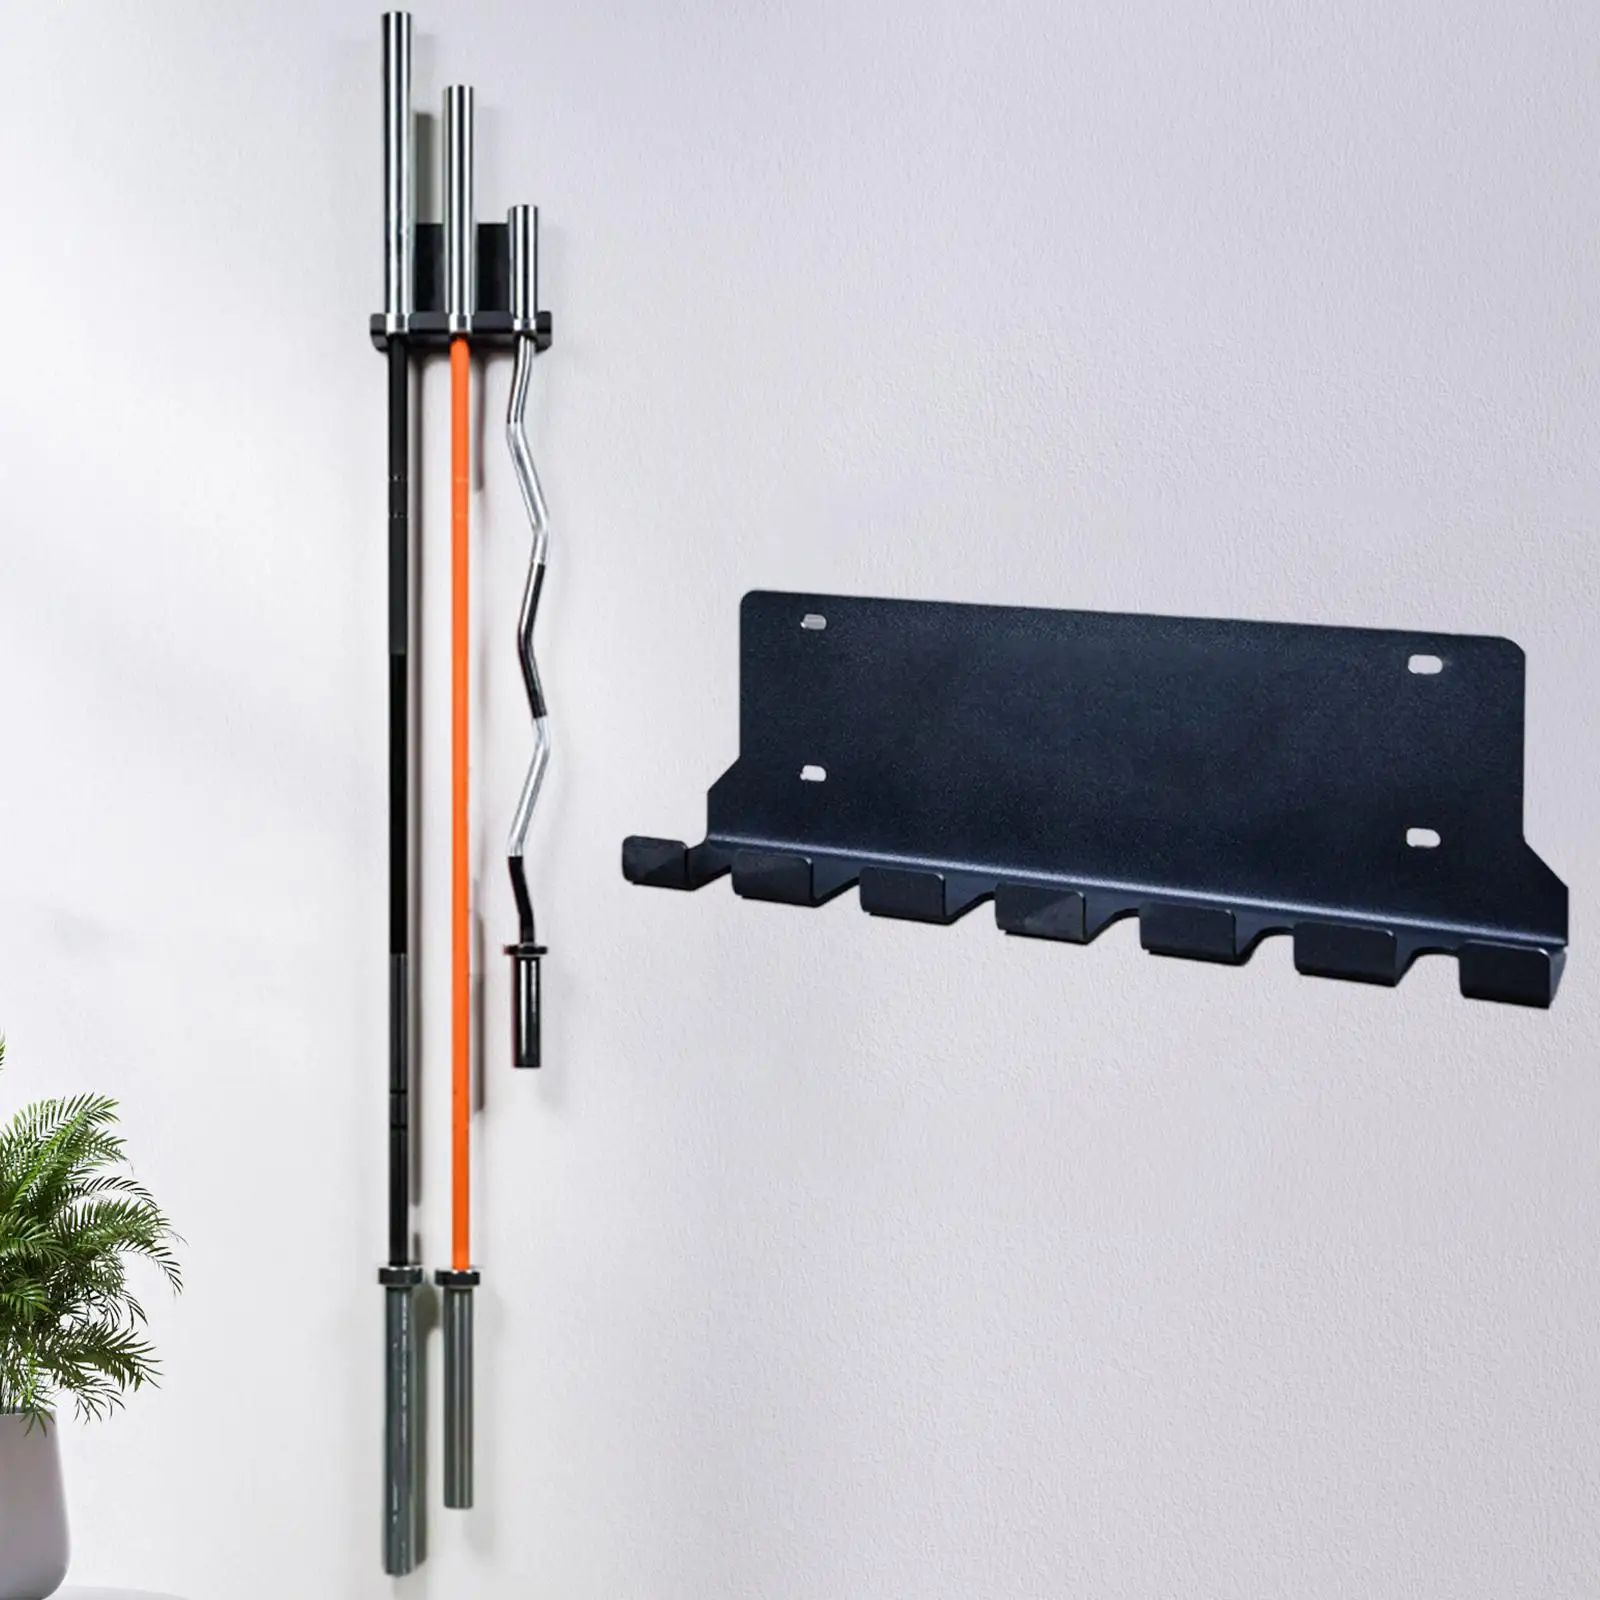 Barbell Storage Holder Rack Vertical bars Holder Storage Wall Mount Space Saving Hanger for Gym Fitness Home Accessories